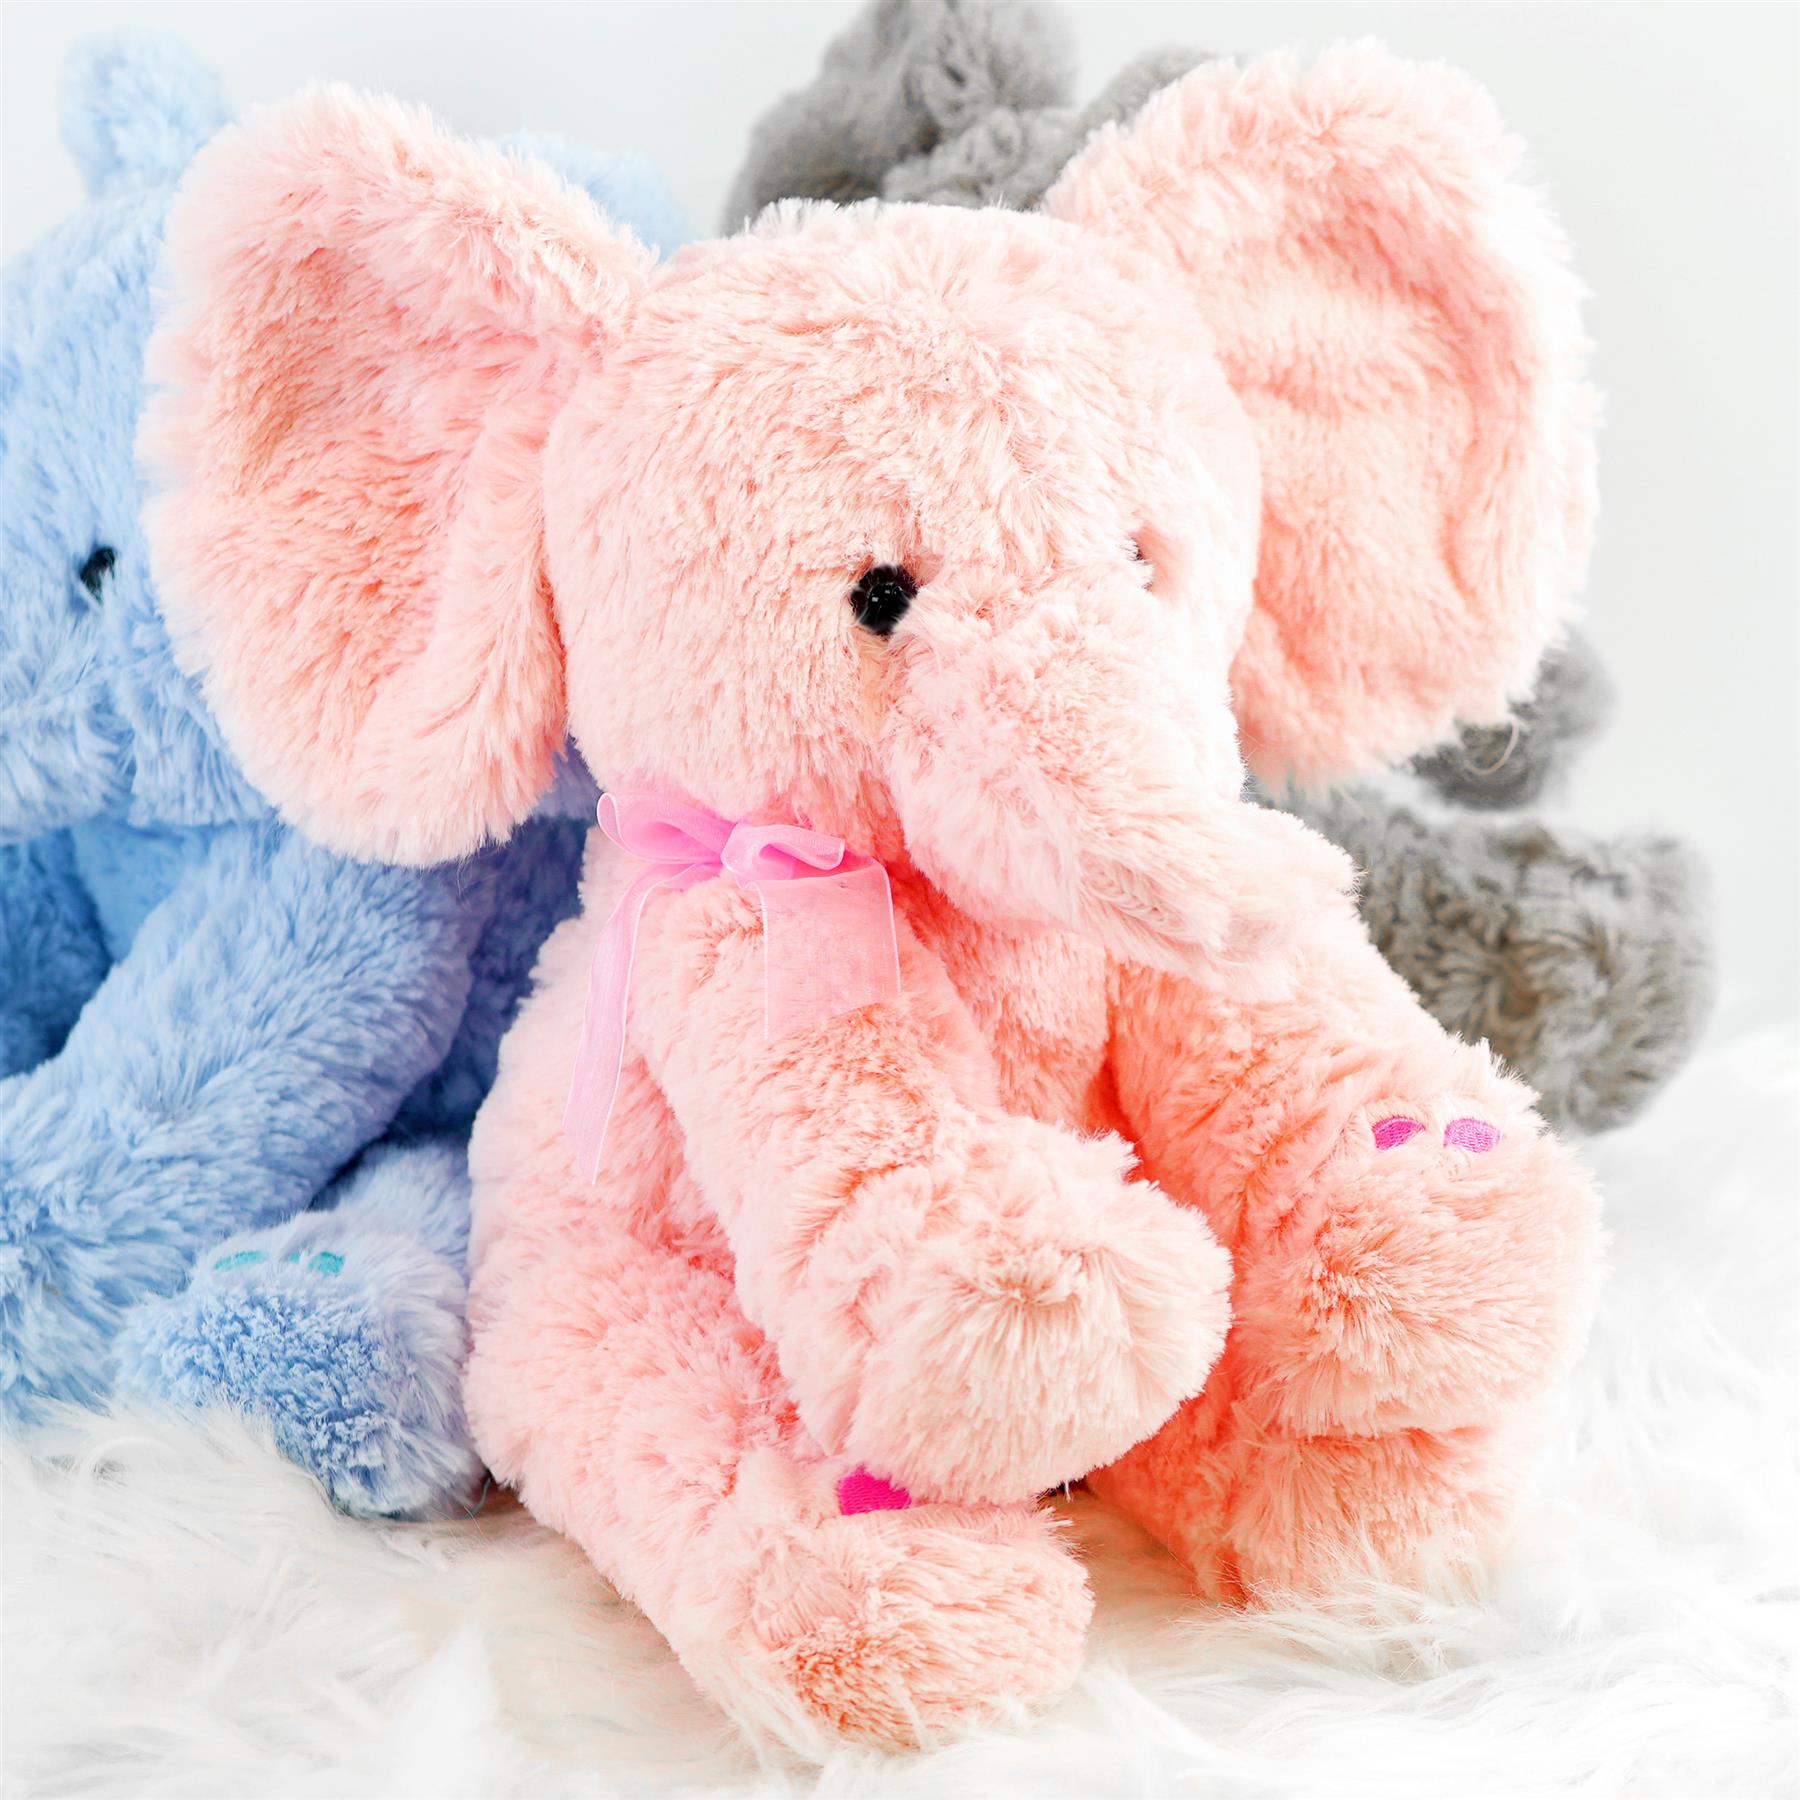 The Magic Toy Shop Toys and Games Pink Plush Elephant Soft Toys